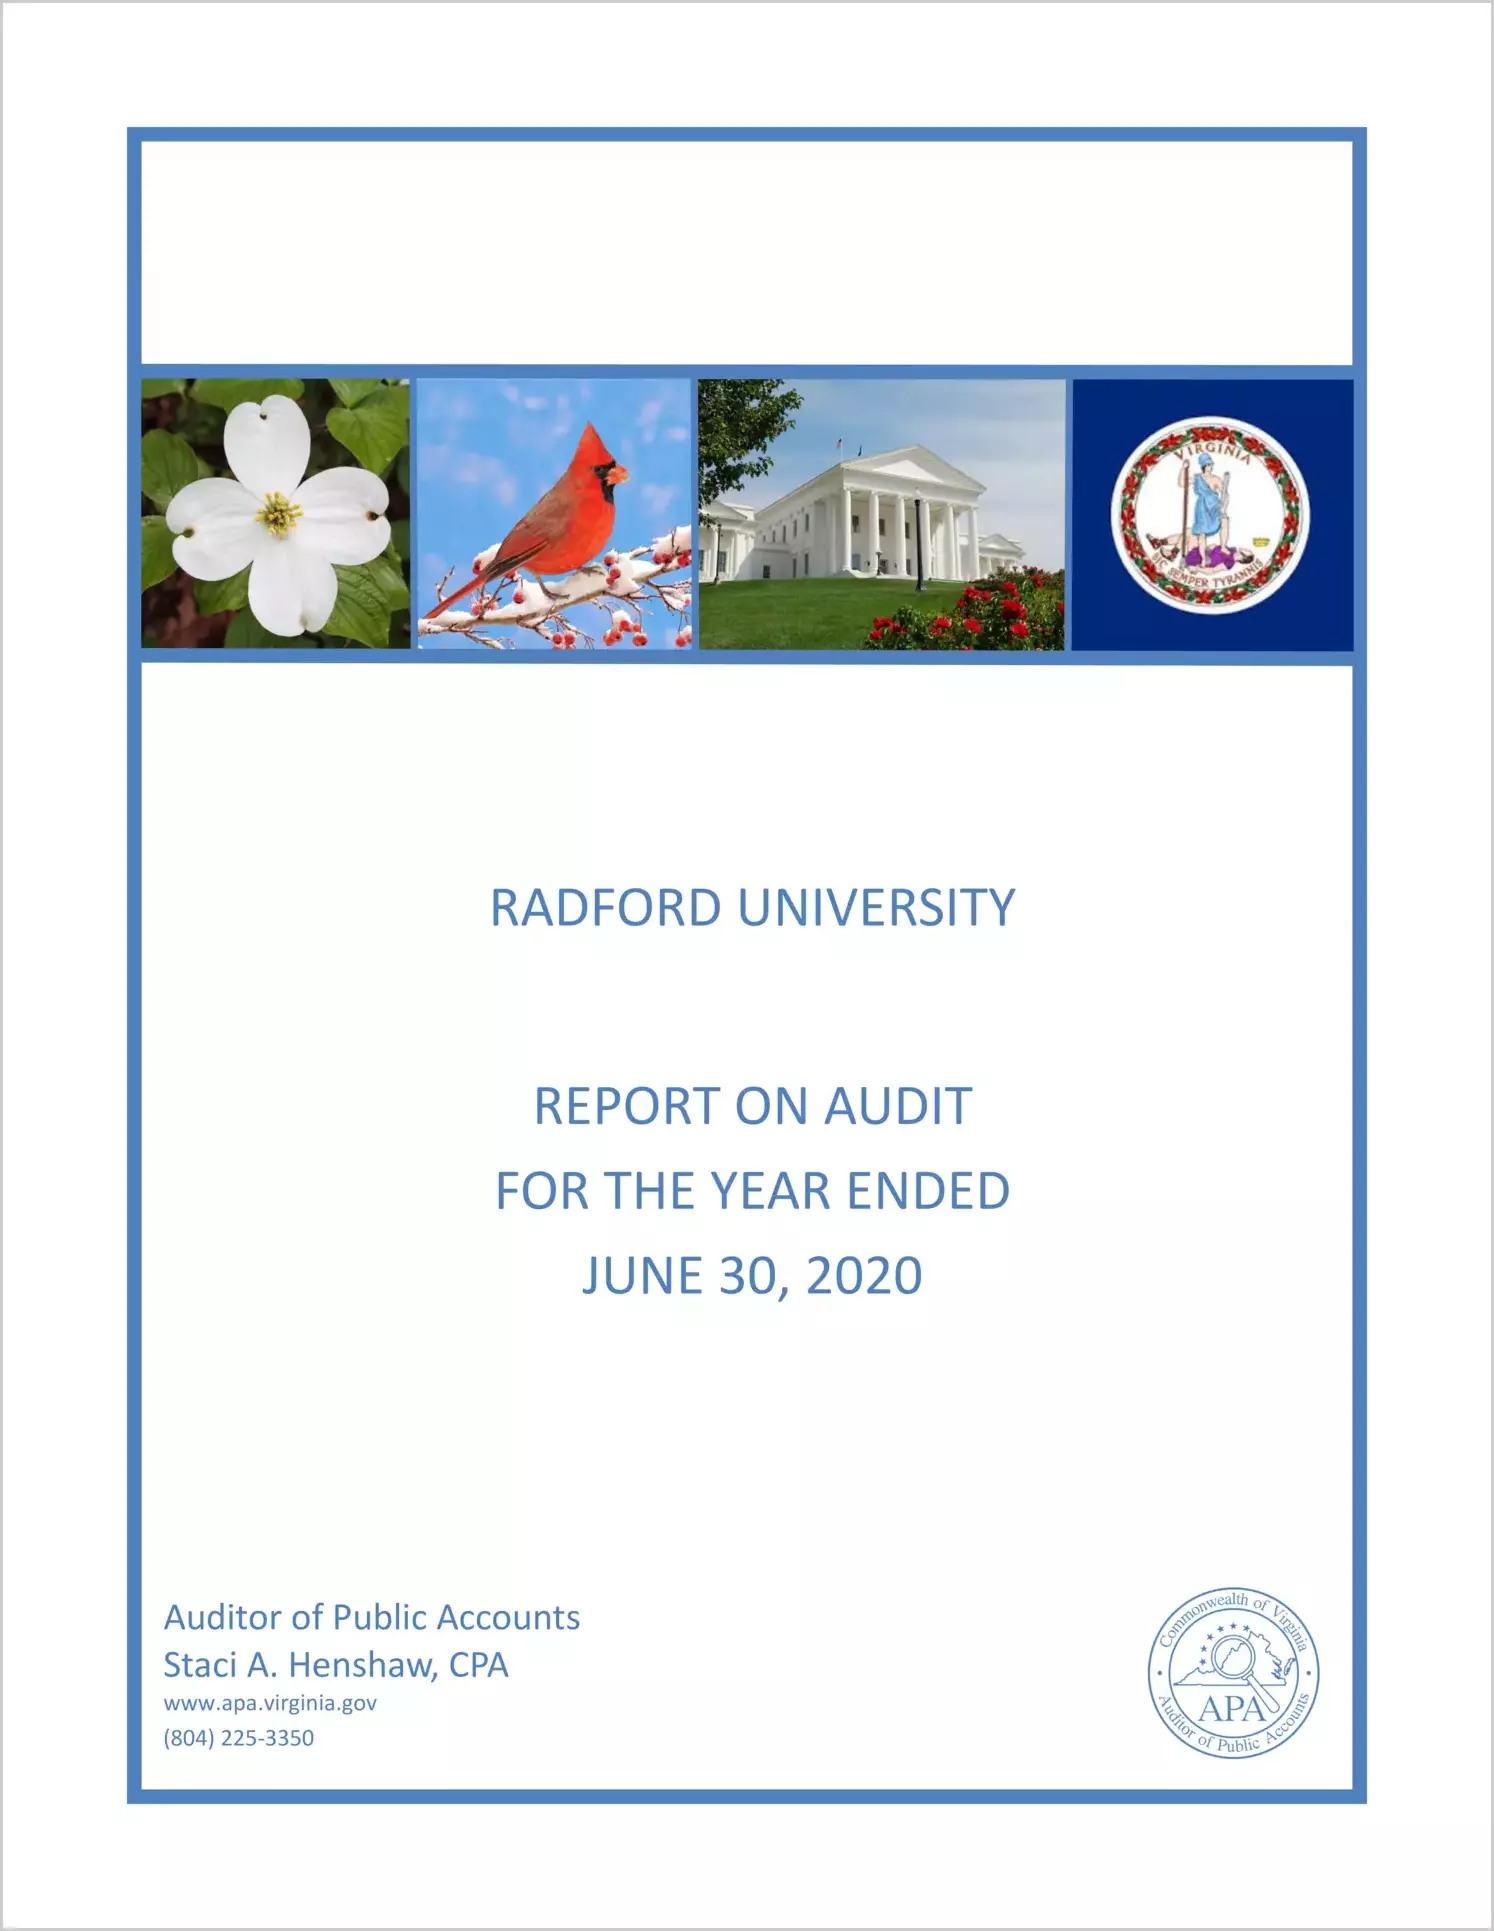 Radford University for the year ended June 30, 2020